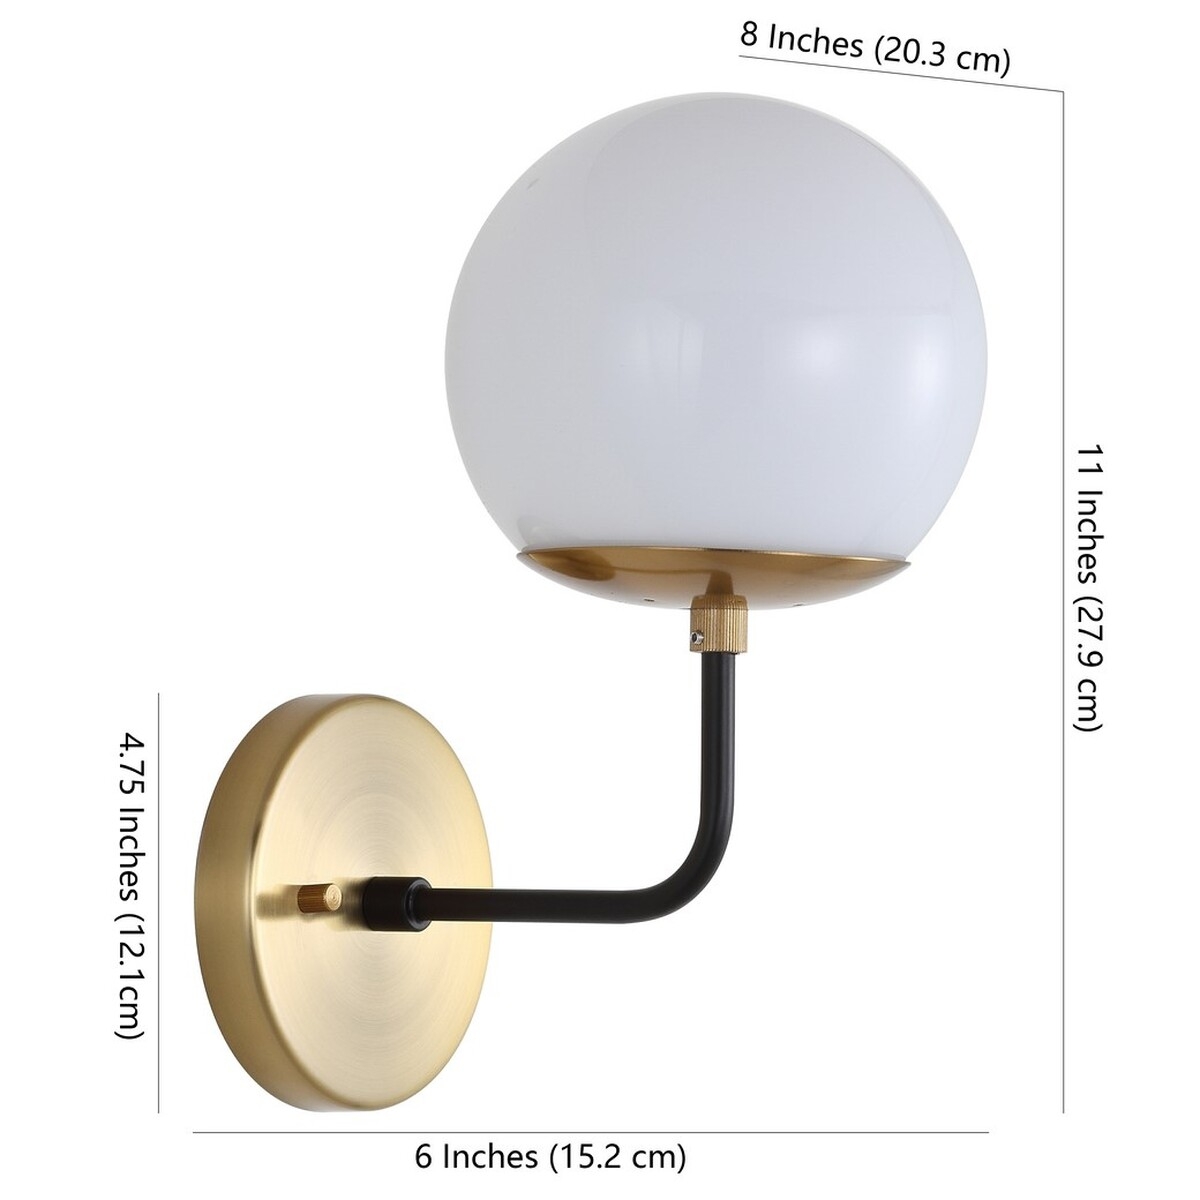 Cayden Wall Sconce - Brass - Arlo Home - Image 4